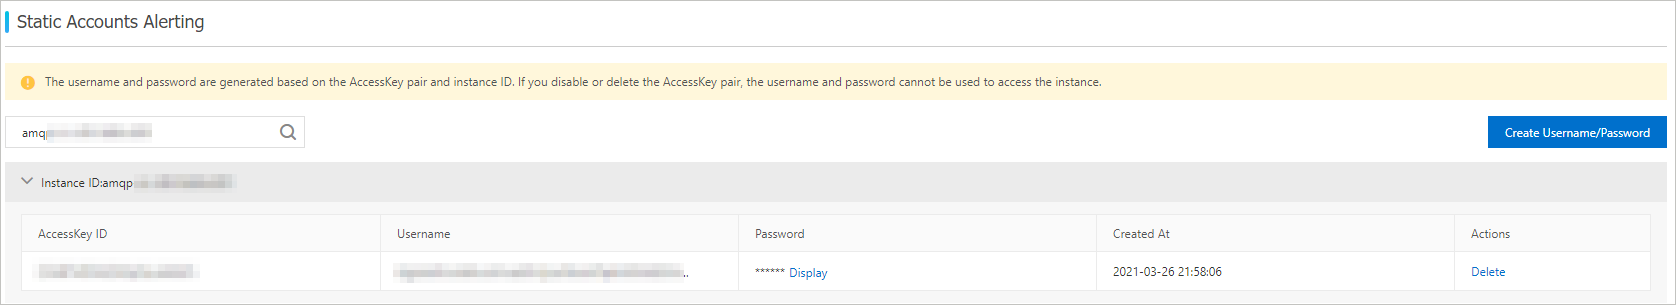 pg_Username/Password Management page